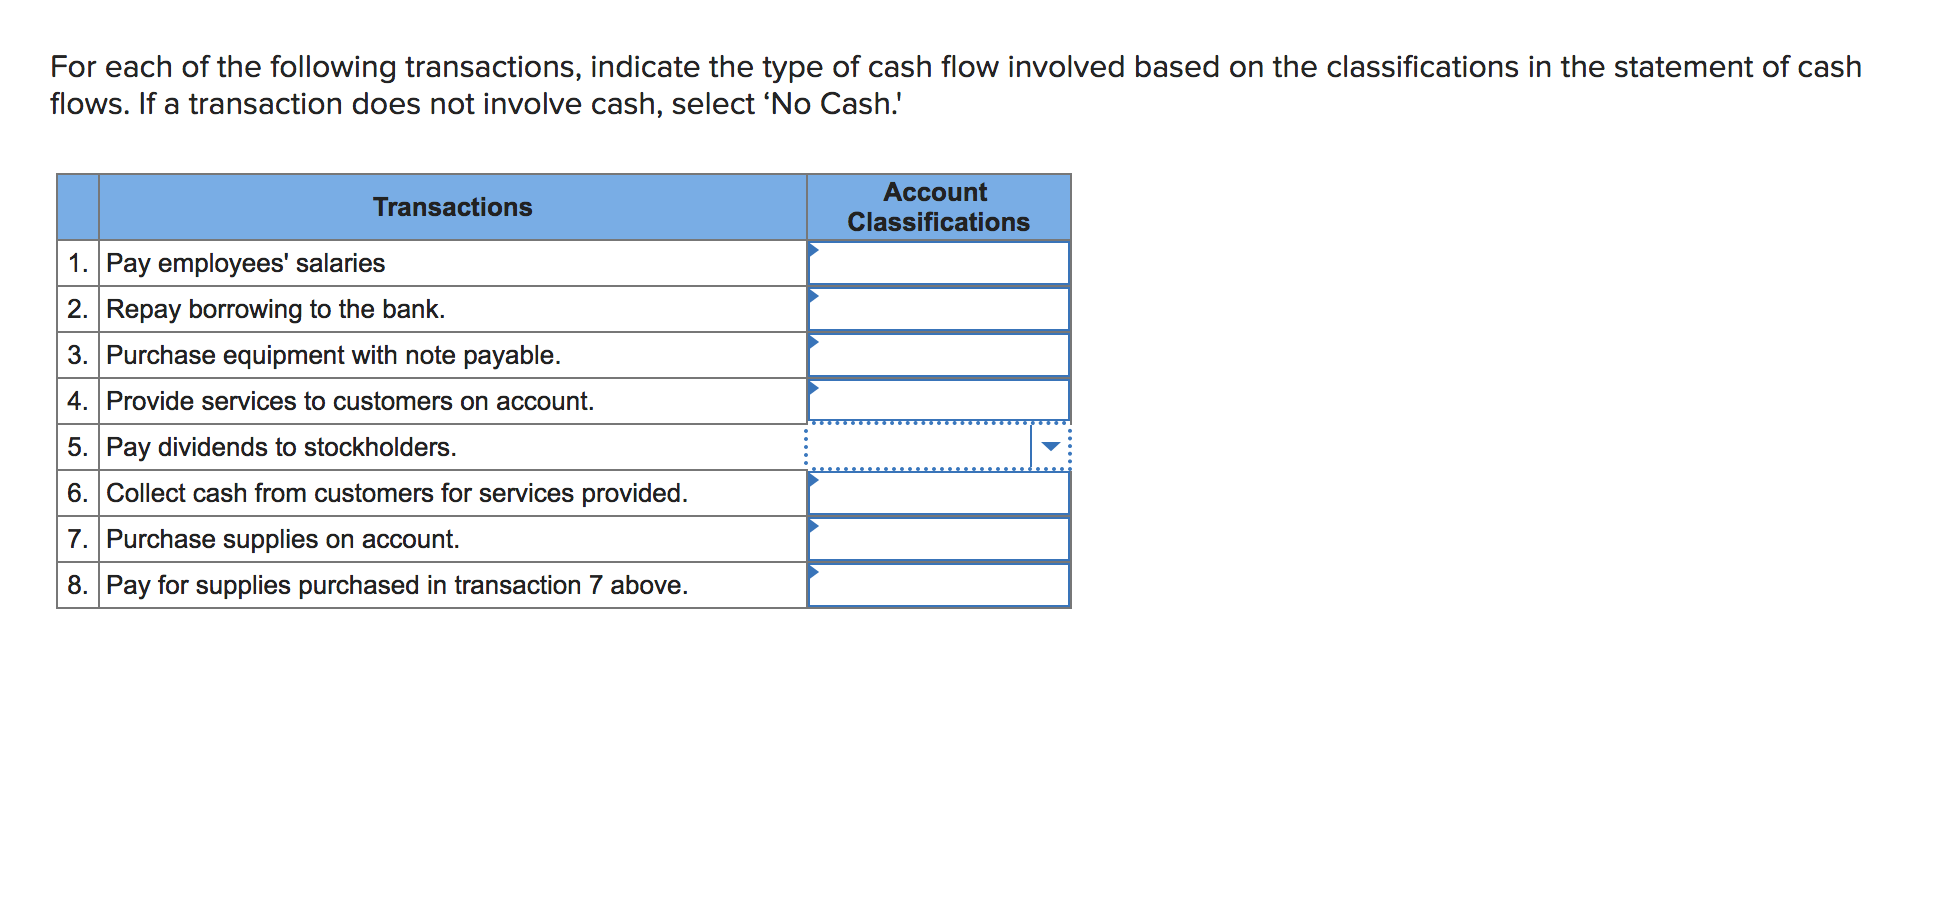 For each of the following transactions, indicate the type of cash flow involved based on the classifications in the statement of cash
flows. If a transaction does not involve cash, select 'No Cash.
Account
Transactions
Classifications
1. Pay employees' salaries
2. Repay borrowing to the bank
3. Purchase equipment with note payable
4. Provide services to customers on account.
5. Pay dividends to stockholders.
6. Collect cash from customers for services provided
7. Purchase supplies on account.
8. Pay for supplies purchased in transaction 7 above.
